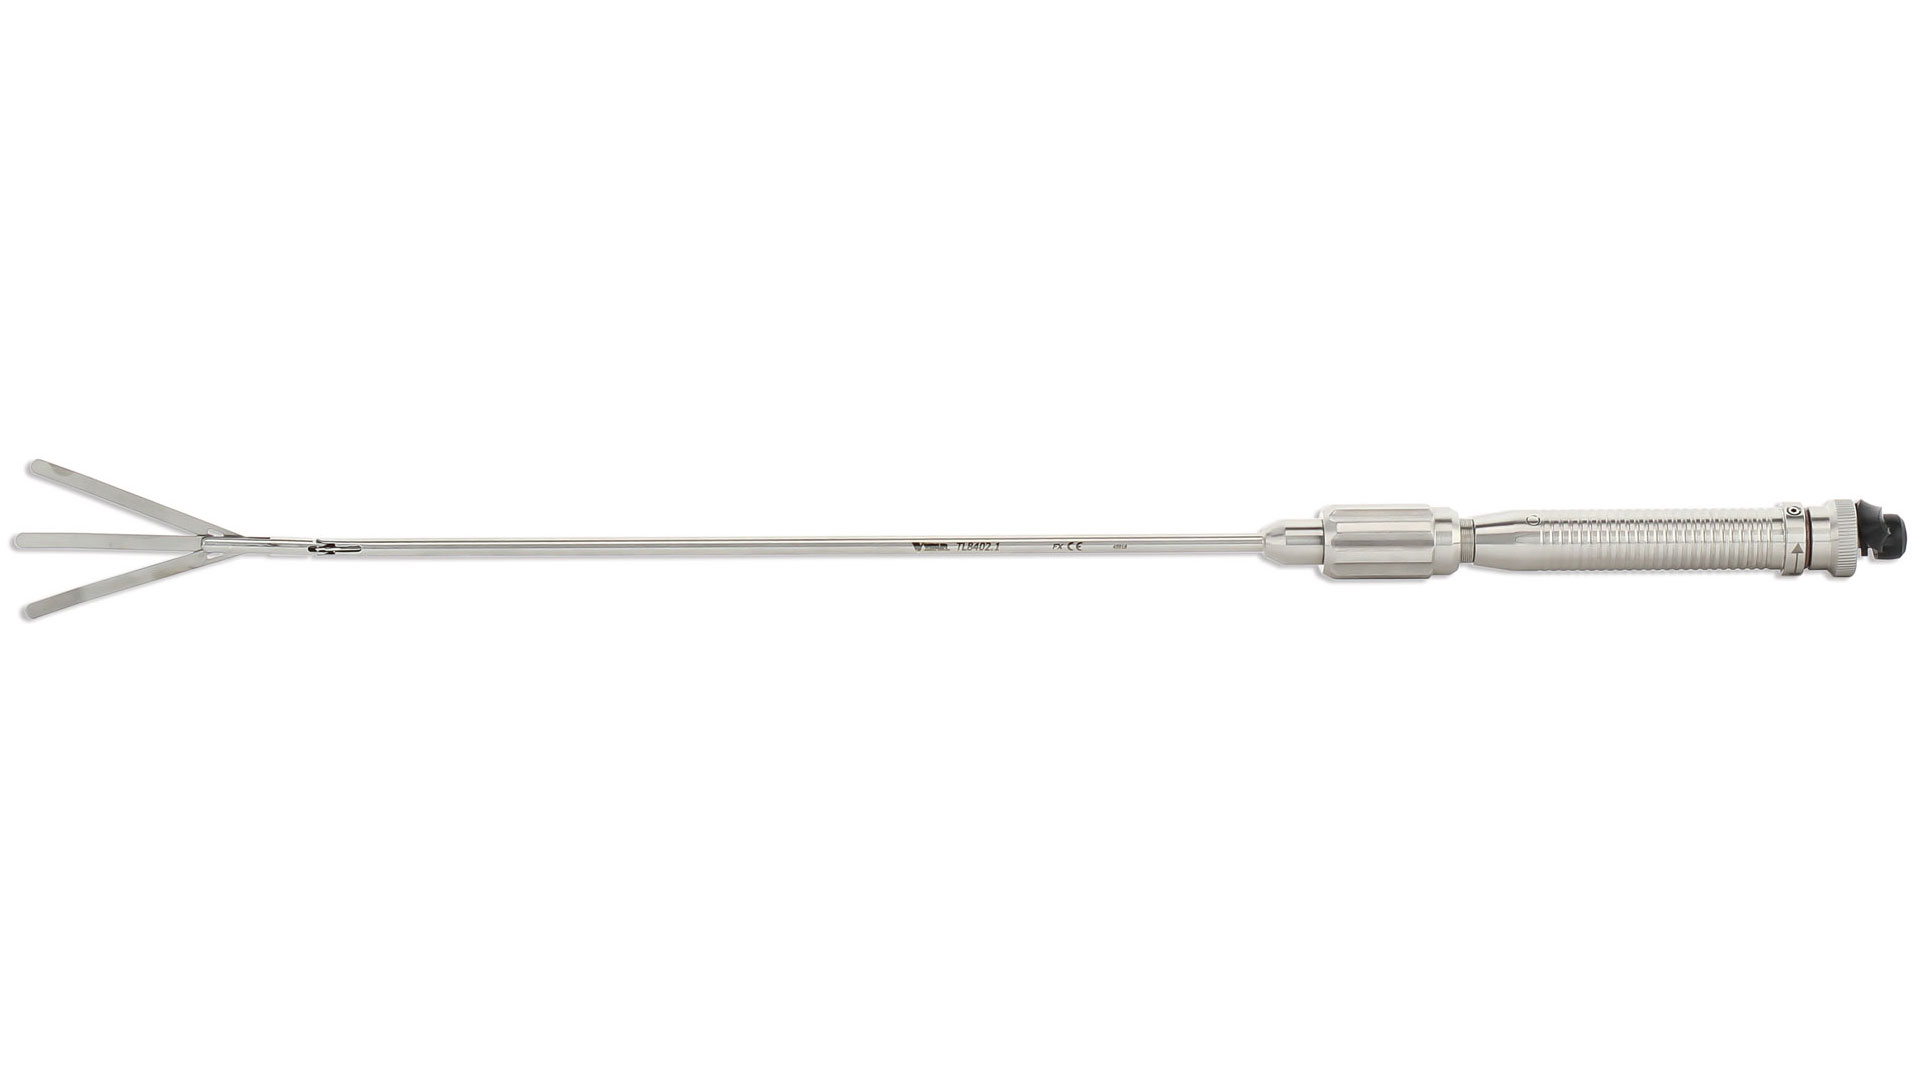 Thoracoscopic Fan Retractor - Straight 5mm Articulating Shaft